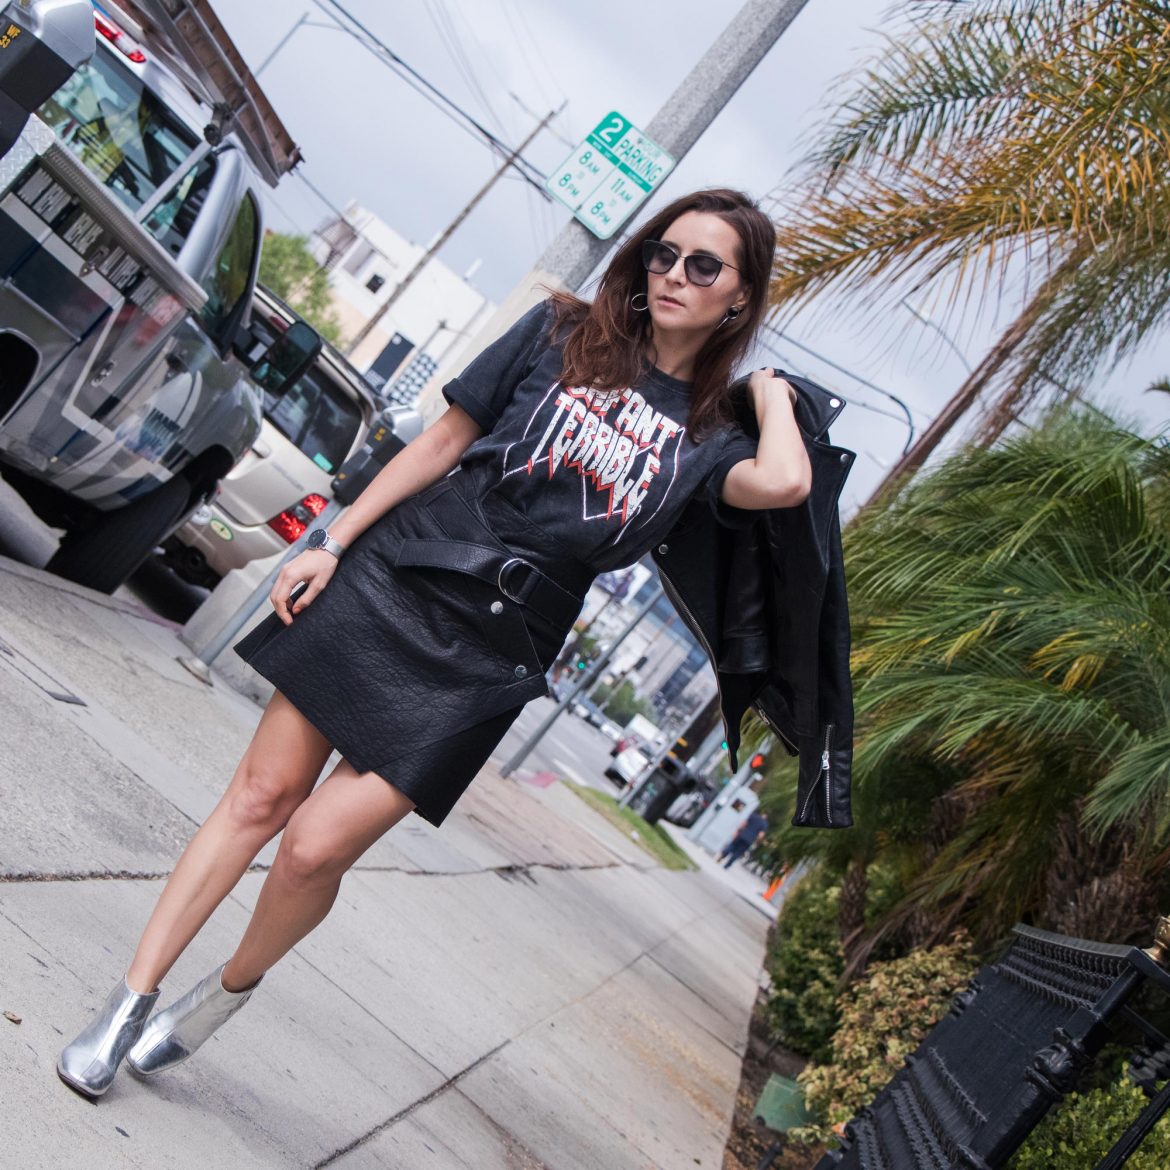 Rock chic look with Maje Enfant Terrible rock band tee - See more on Houseofcomil.com. House of Comil is a Fashion and Lifestyle blog edited by Julia Comil, A French Fashion Blogger in Los Angeles